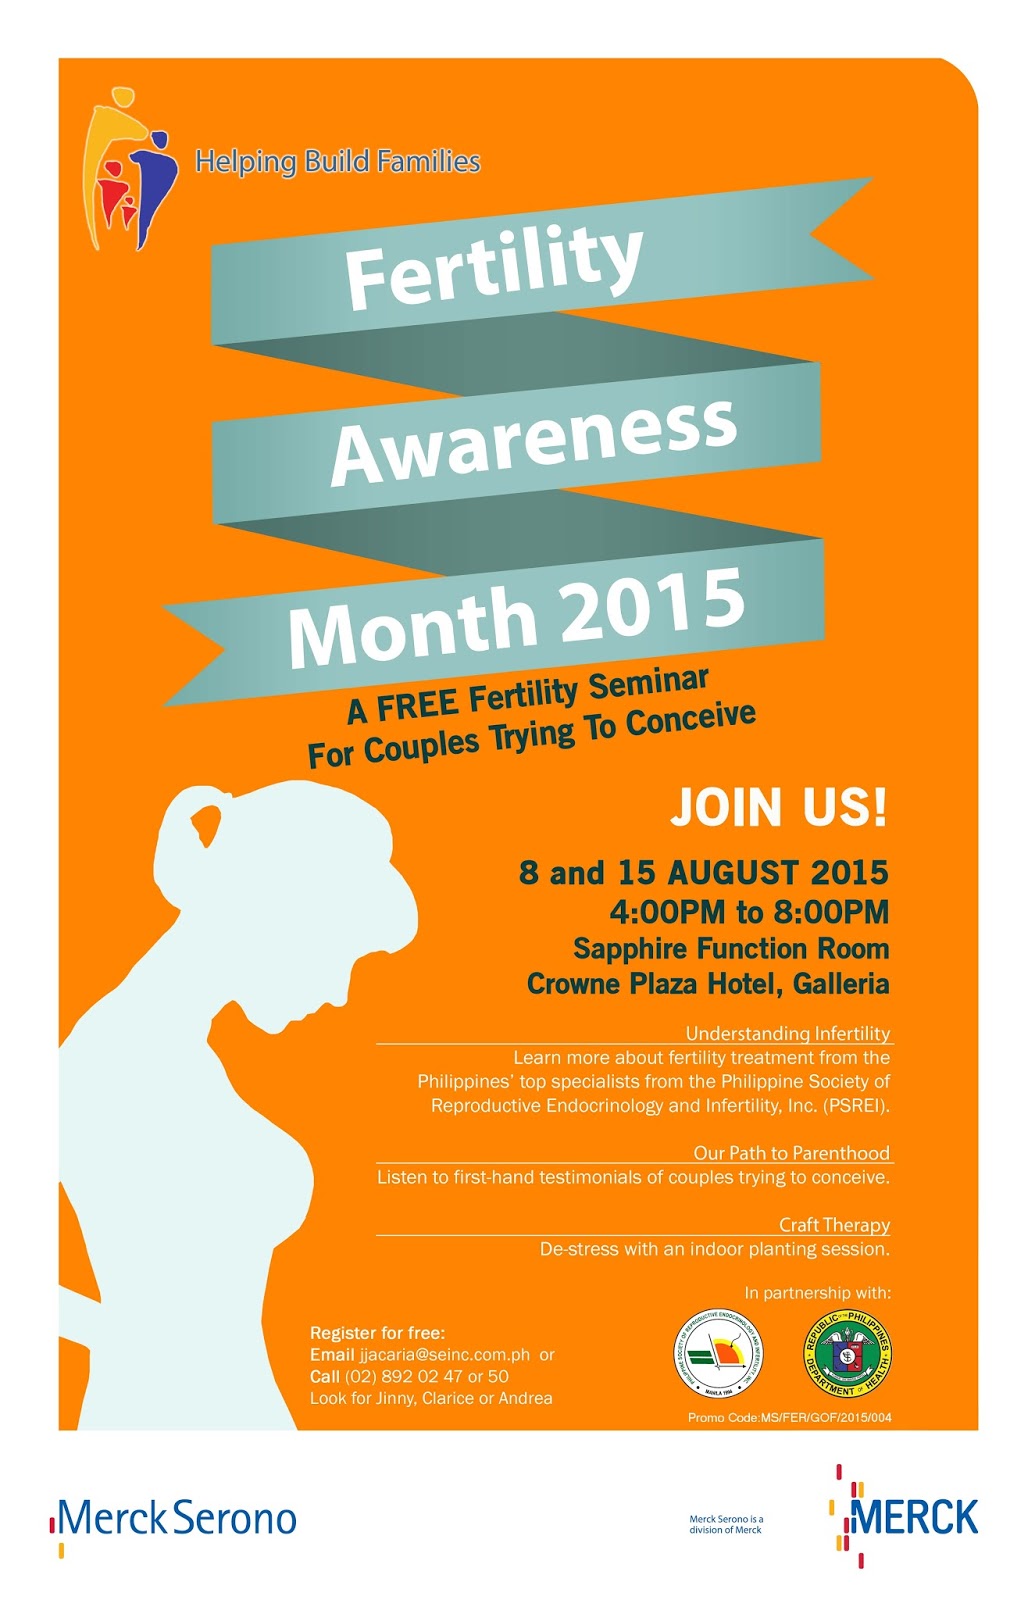 Join in the Fertility Awareness Month Campaign